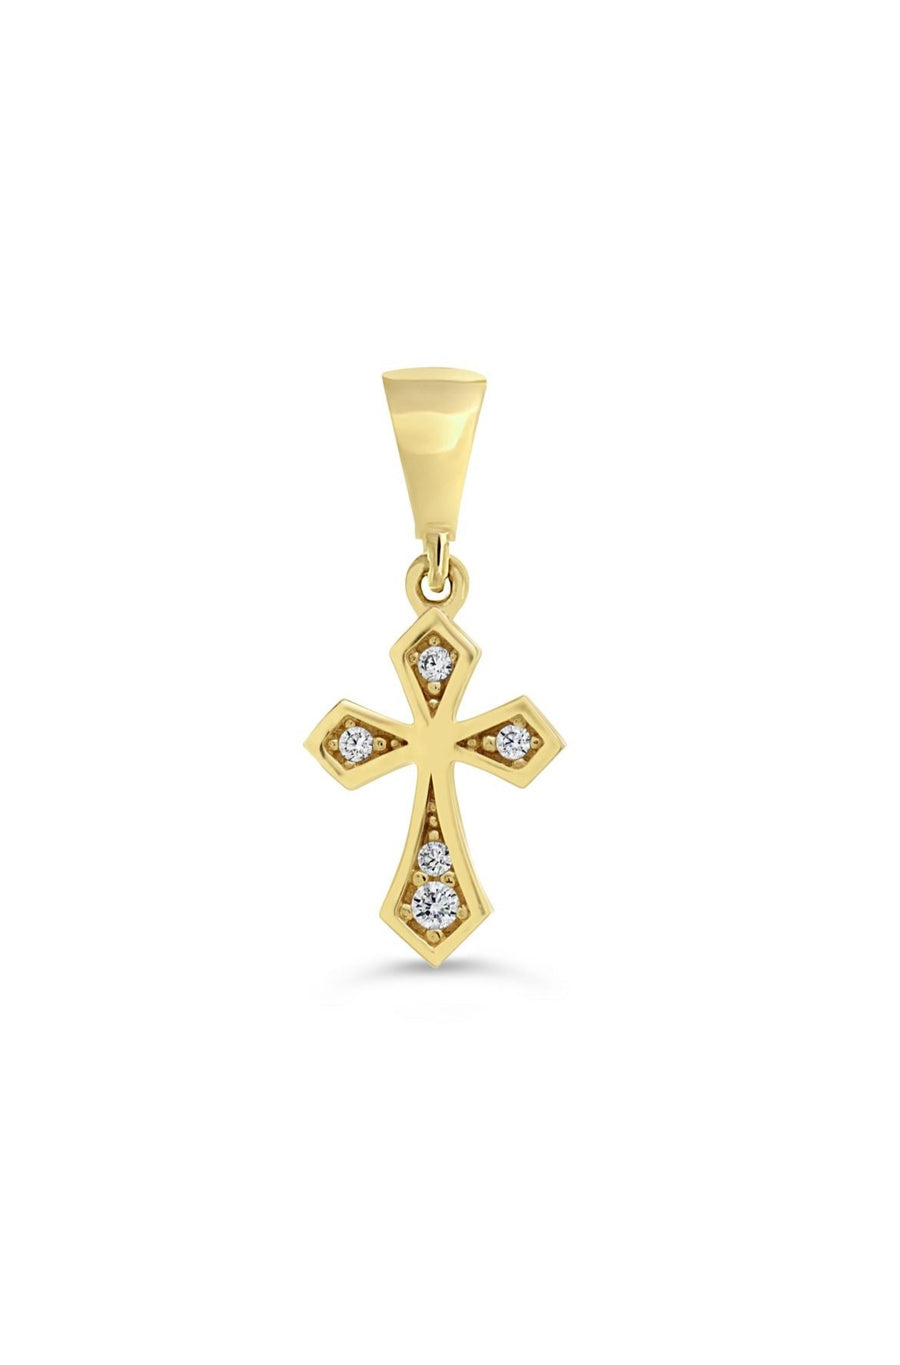 10k Gold Pointed Cross with CZ